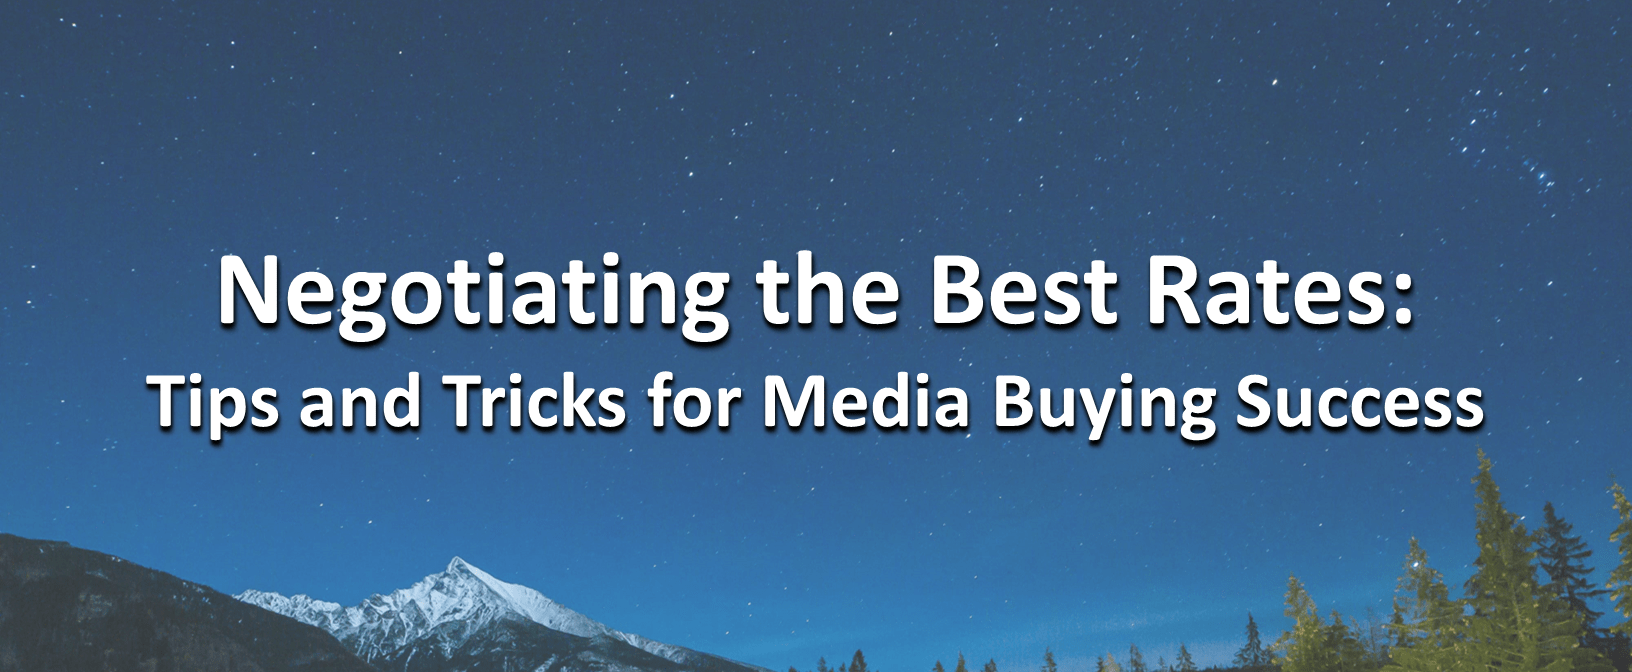 Negotiating the Best Rates: Tips and Tricks for Media Buying Success